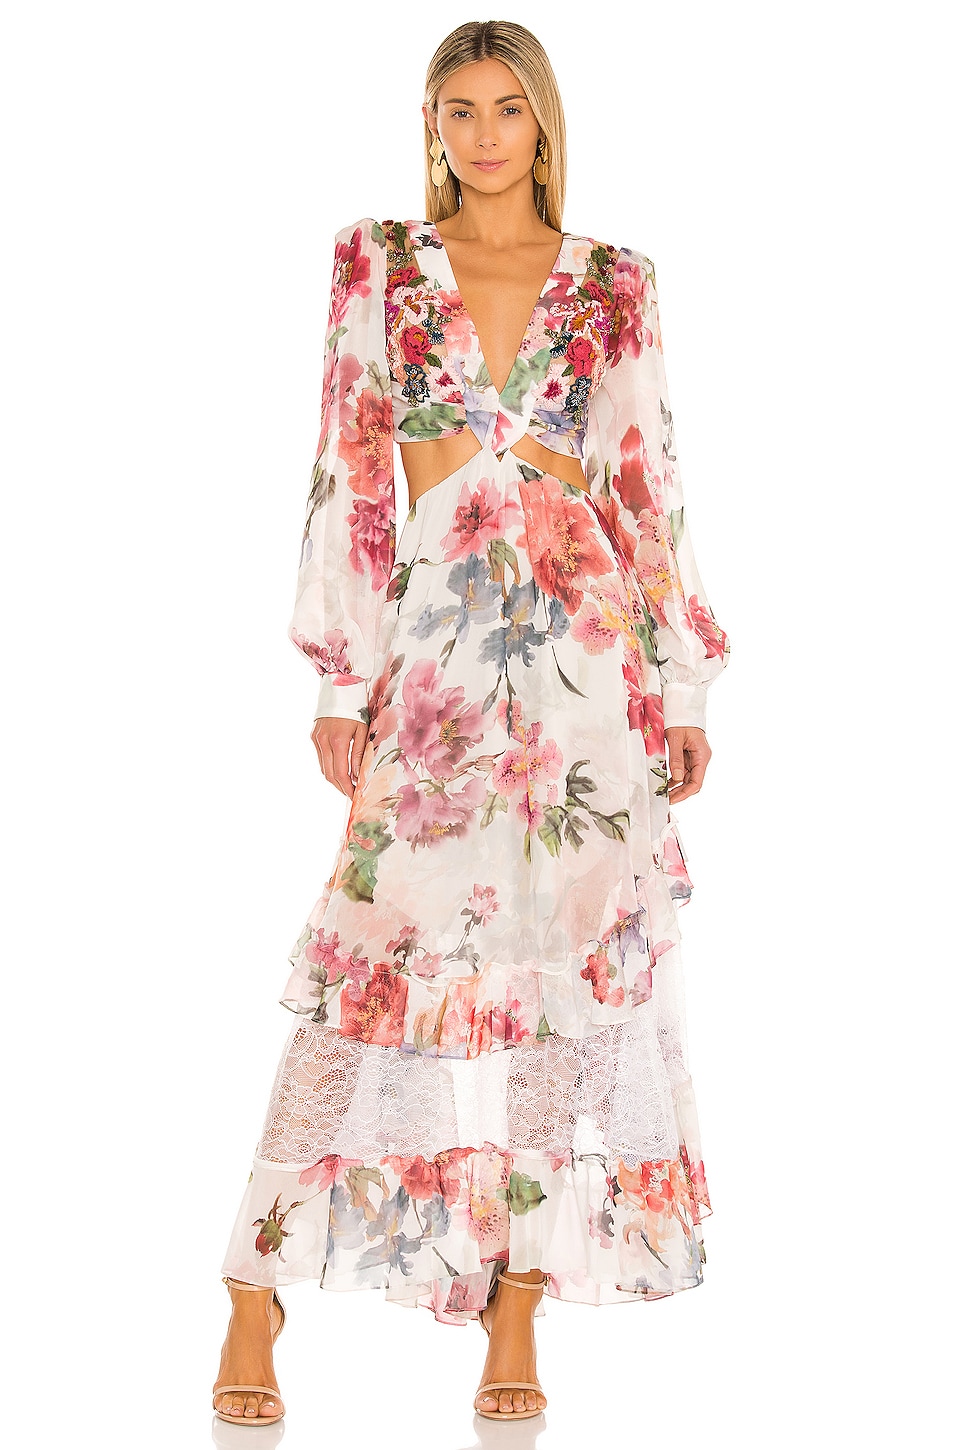 PatBO Floral Printed Beaded Cut Out Dress in Off White | REVOLVE